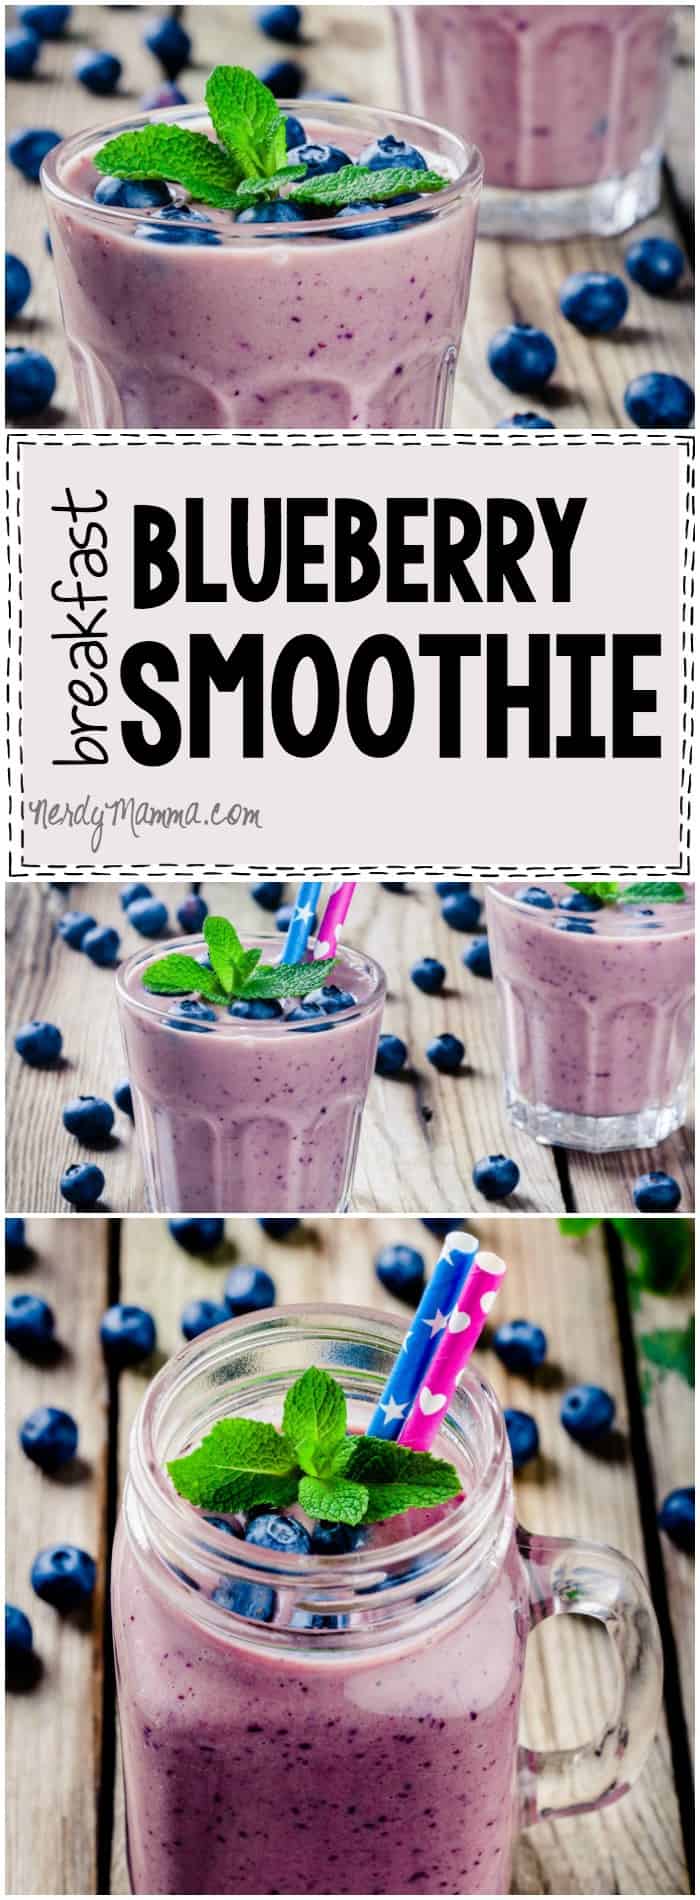 Mmmm...a blueberry breakfast smoothie that's dairy-free, vegan, gluten-free, and fast Yes, please! I love it!